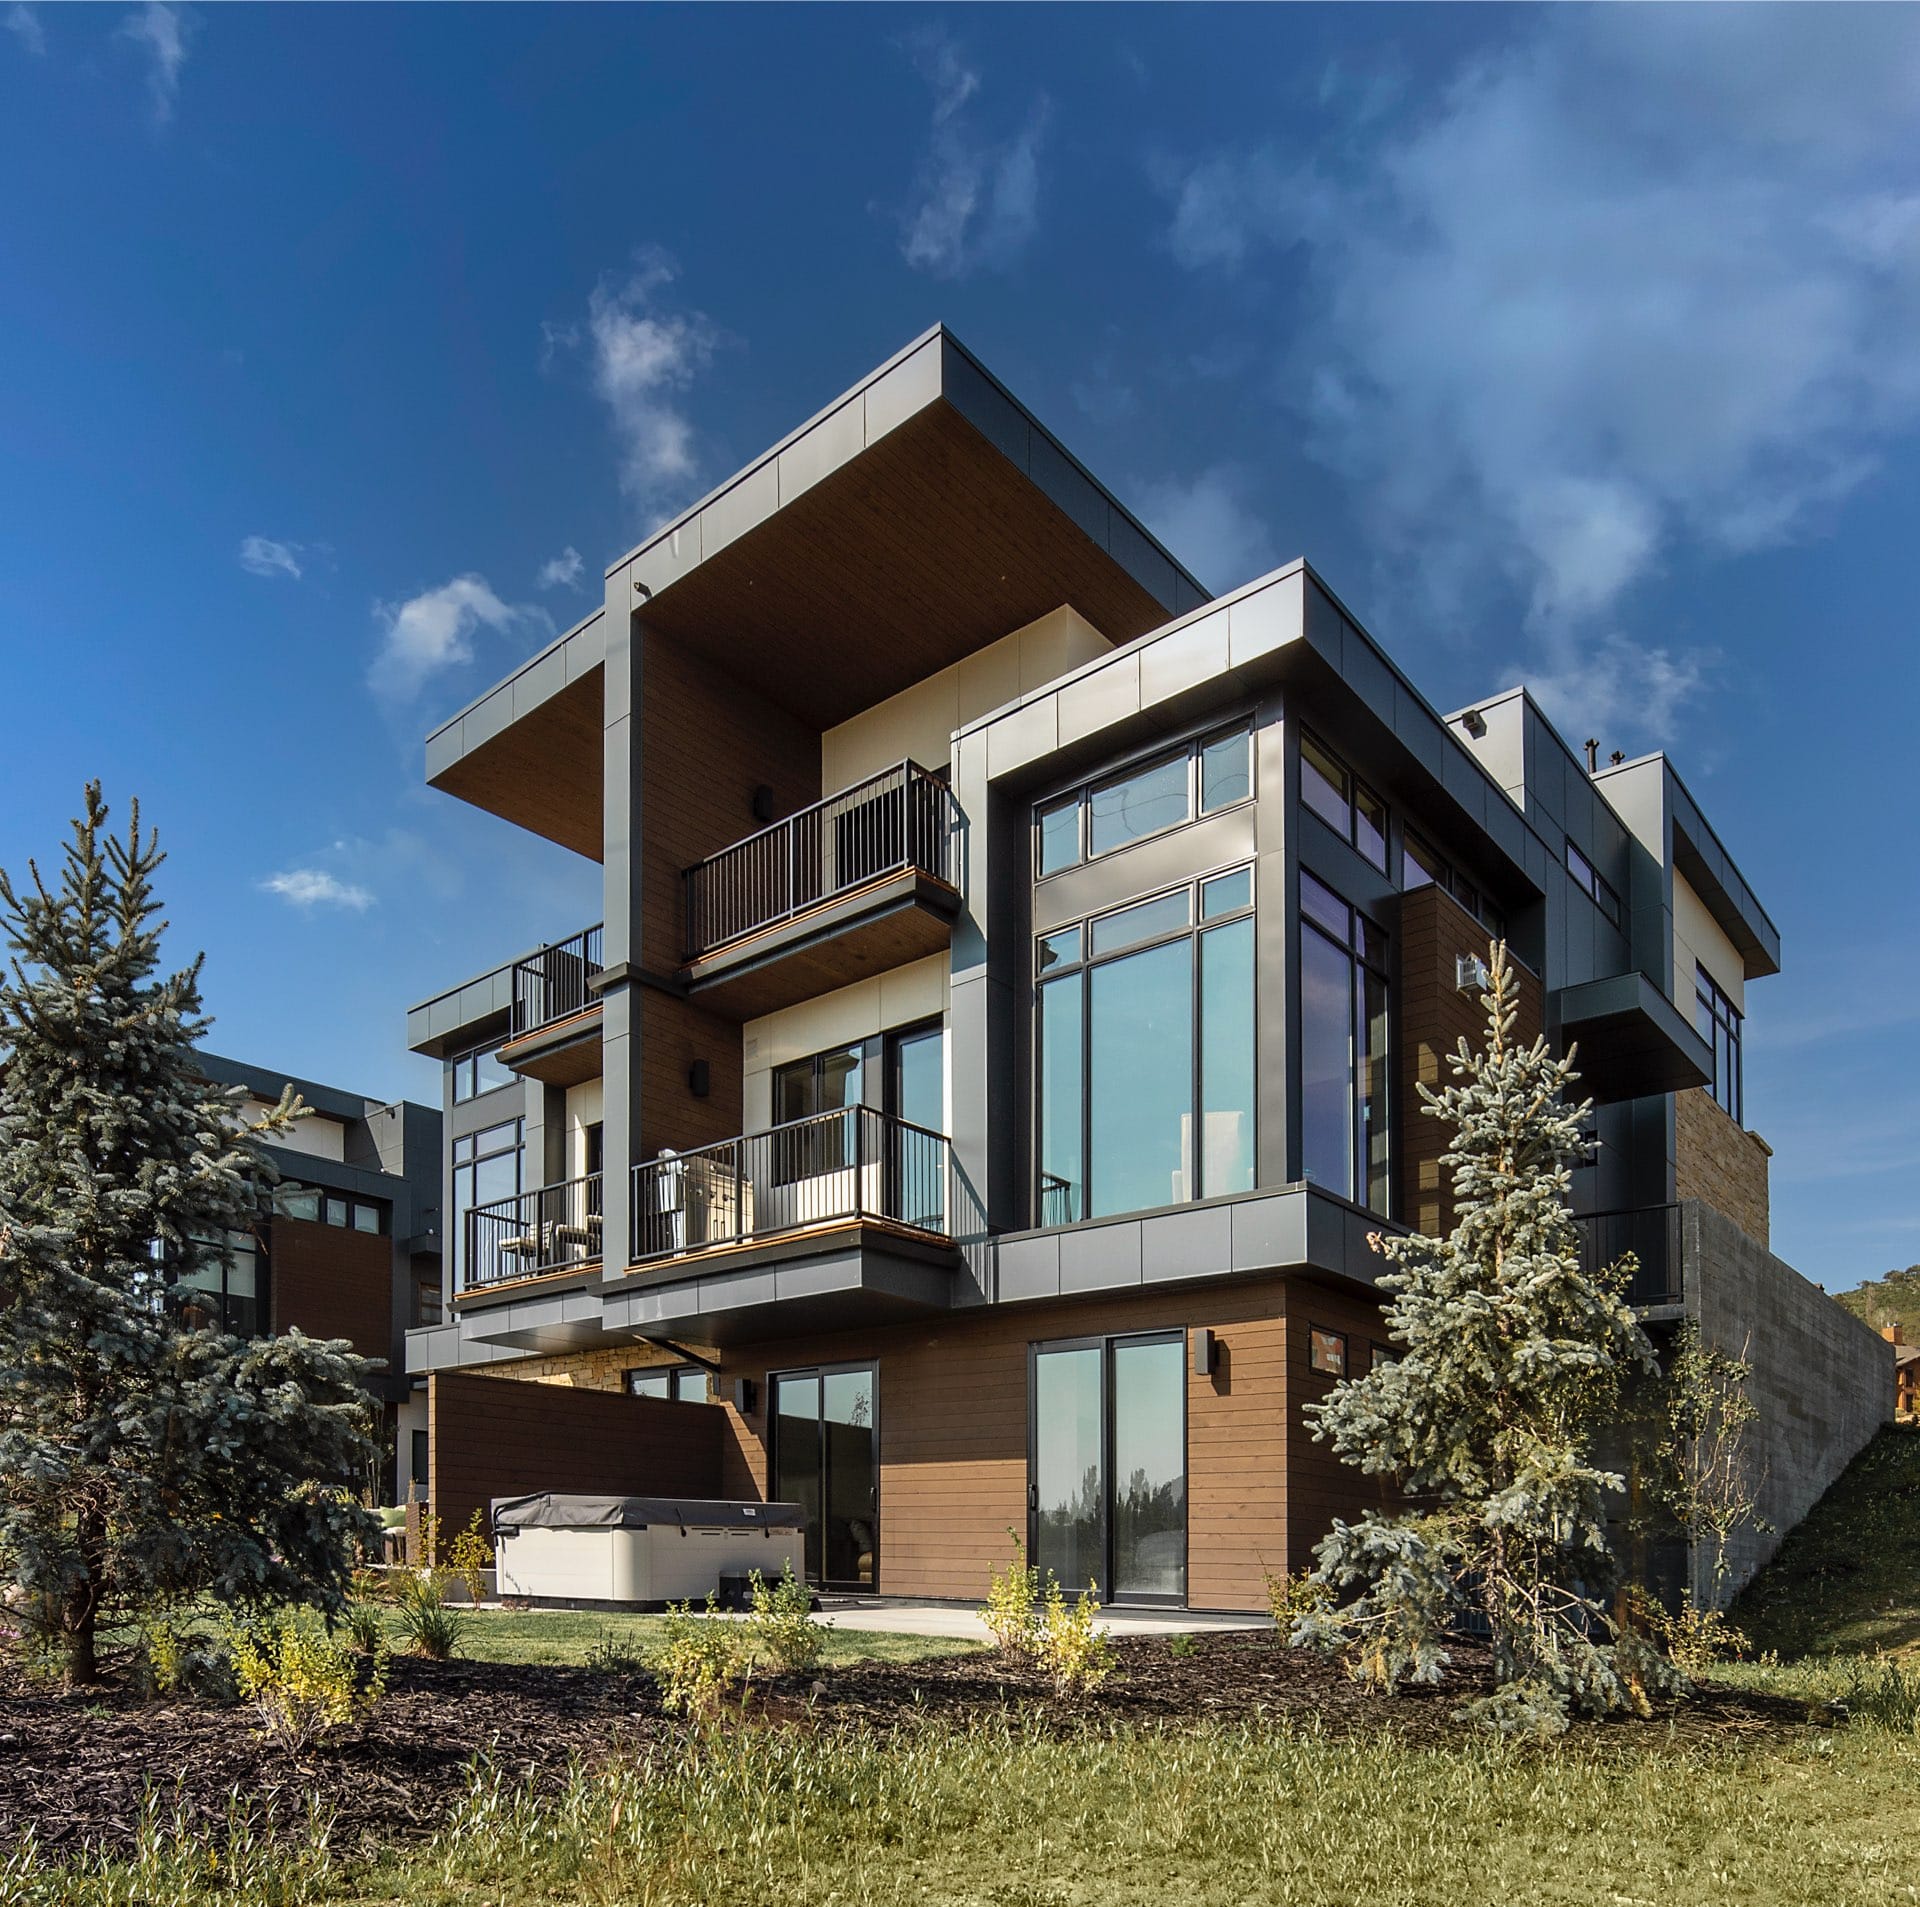 Viridian Townhomes - architectural design by Elliott Workgroup